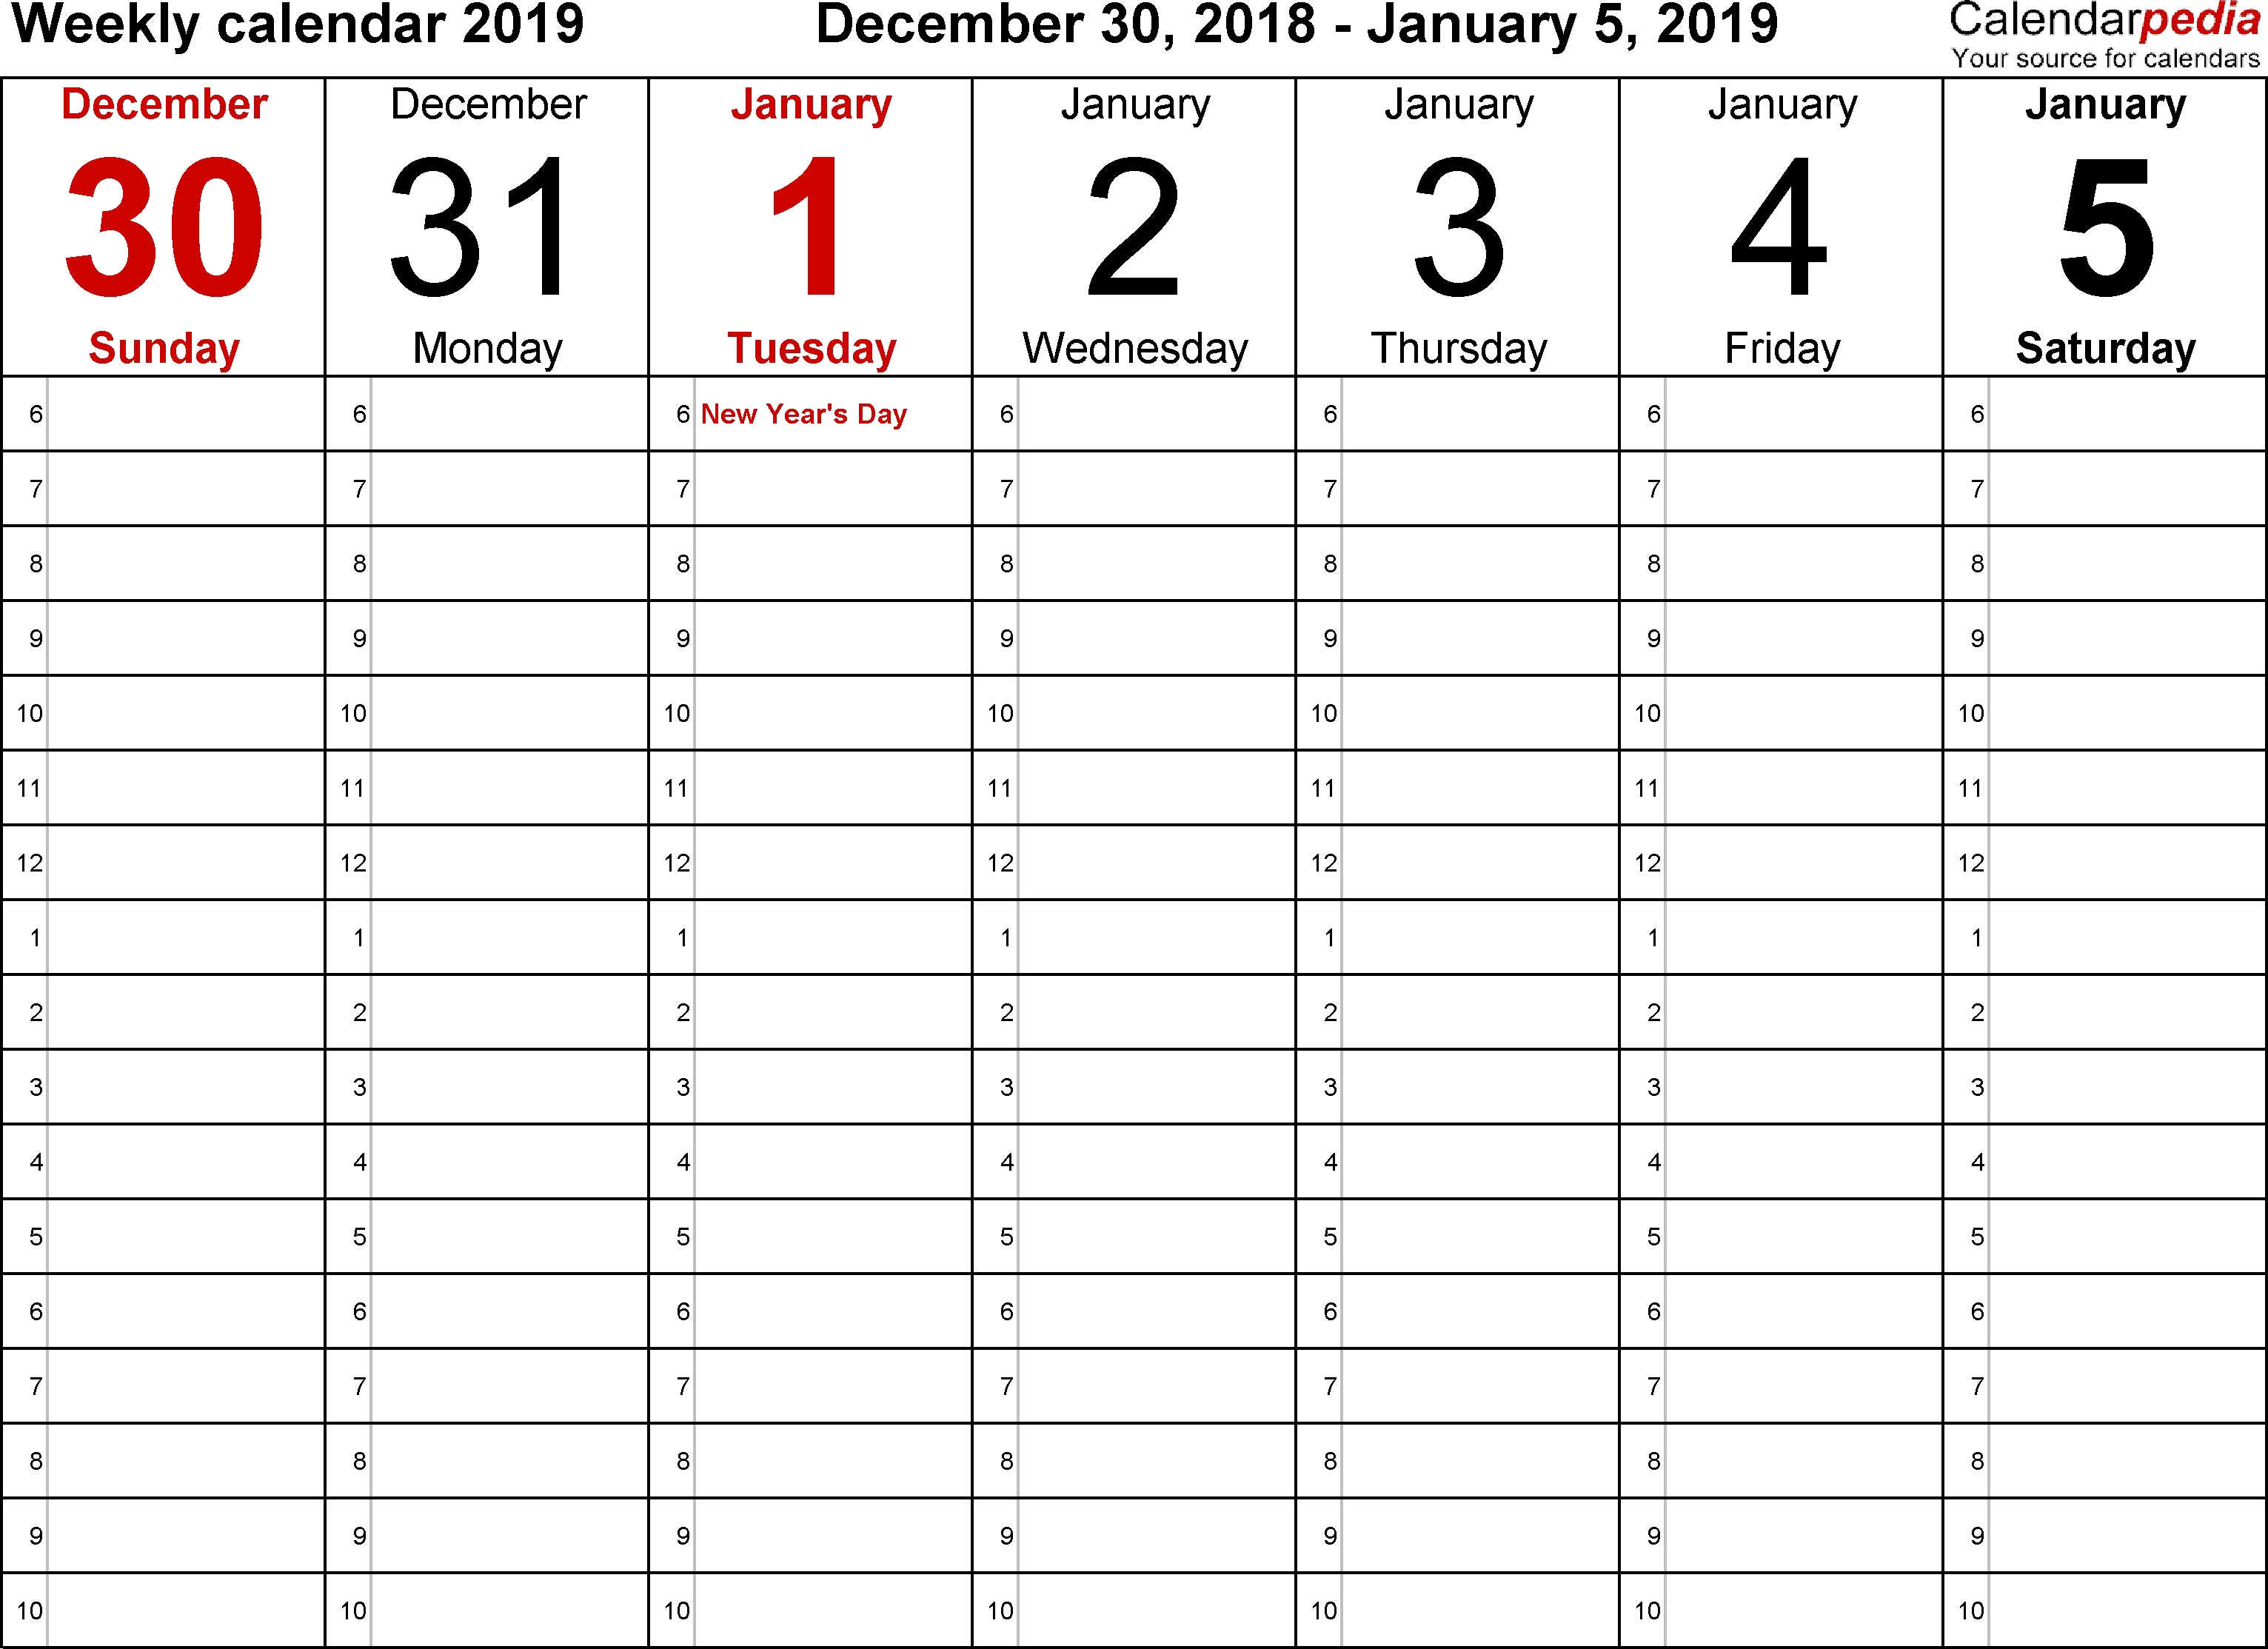 Weekly Calendar 2019 For Word - 12 Free Printable Templates within Blank Weekly Calendar With Times